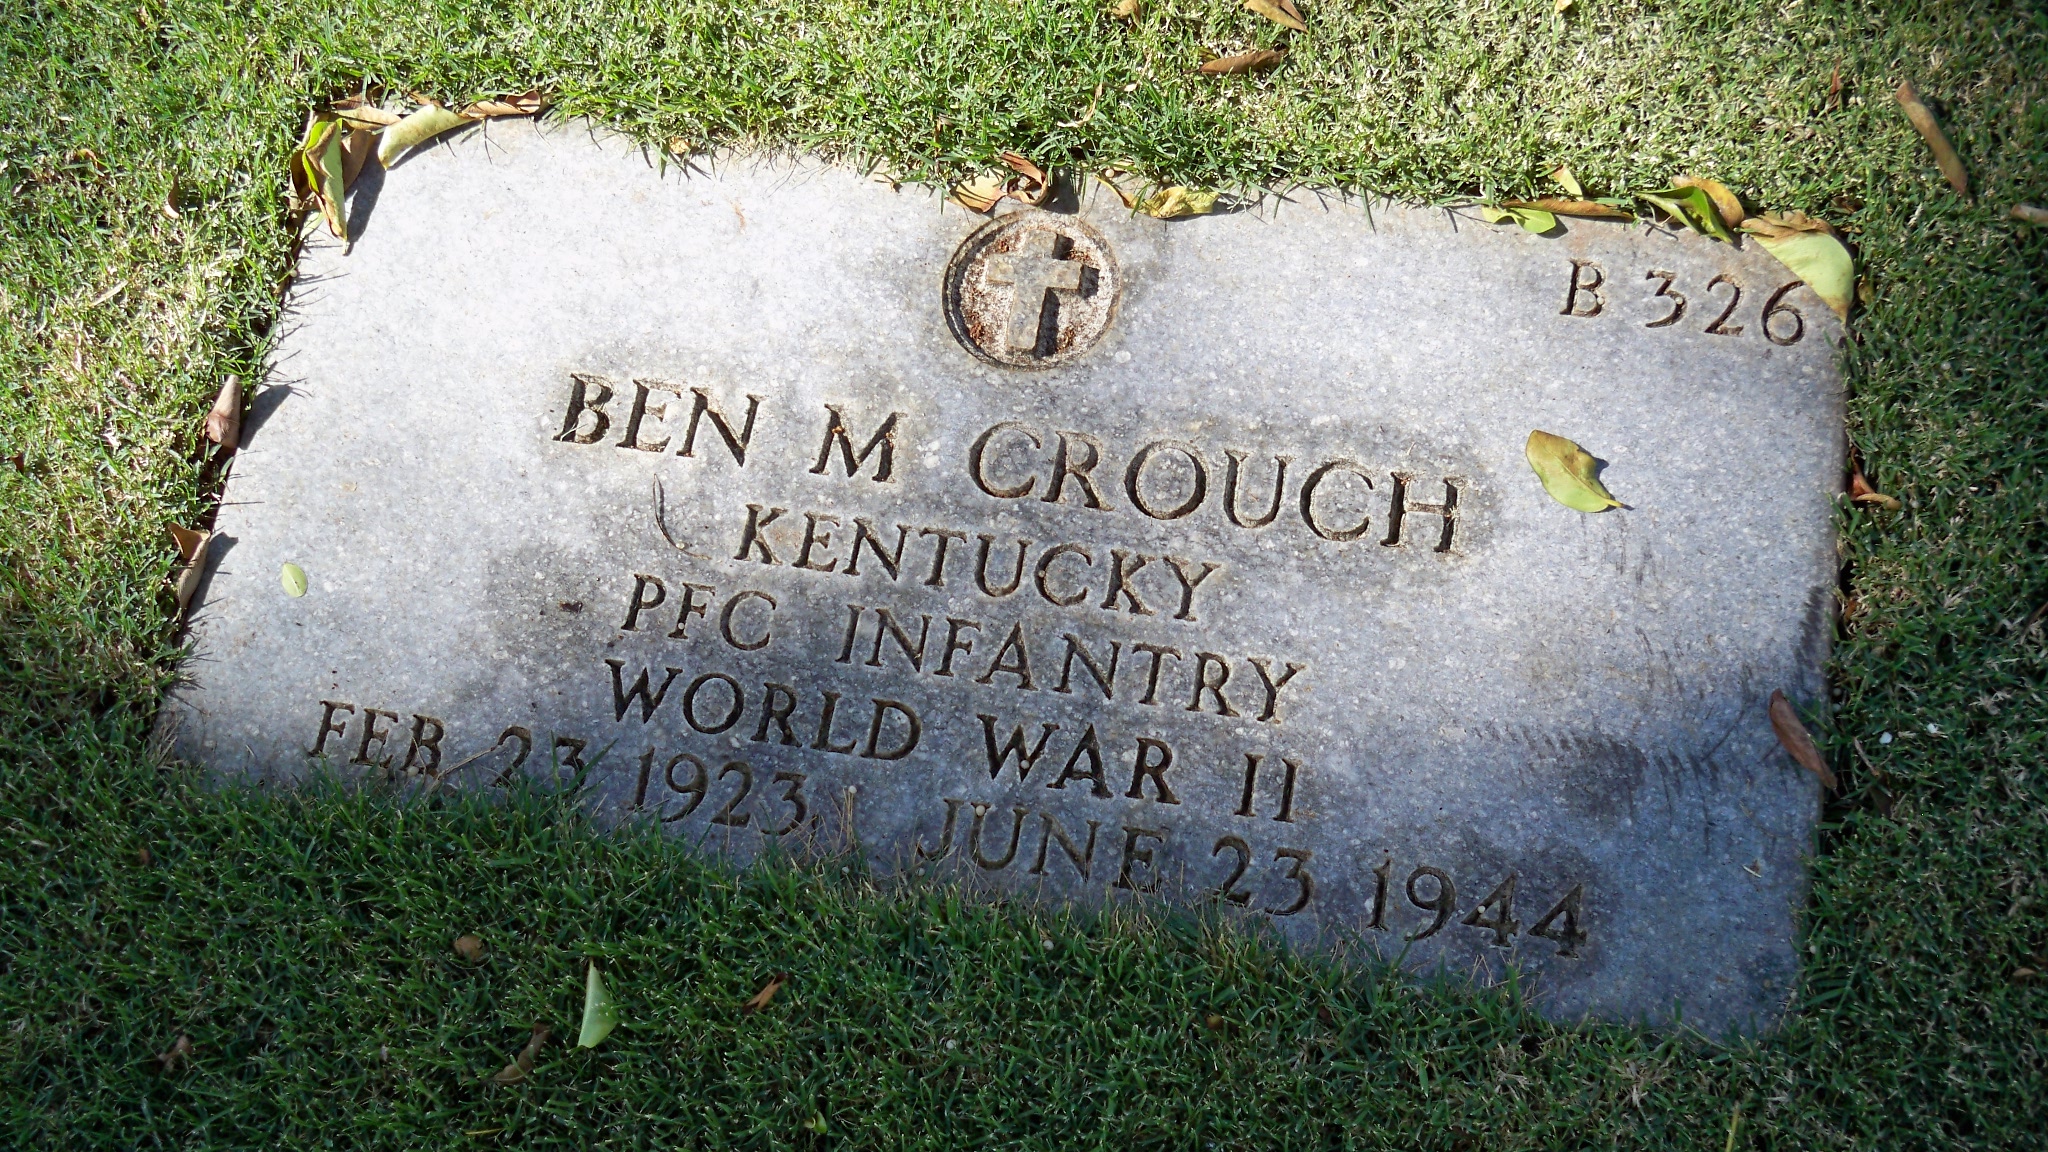 B.M. Crouch (Grave)